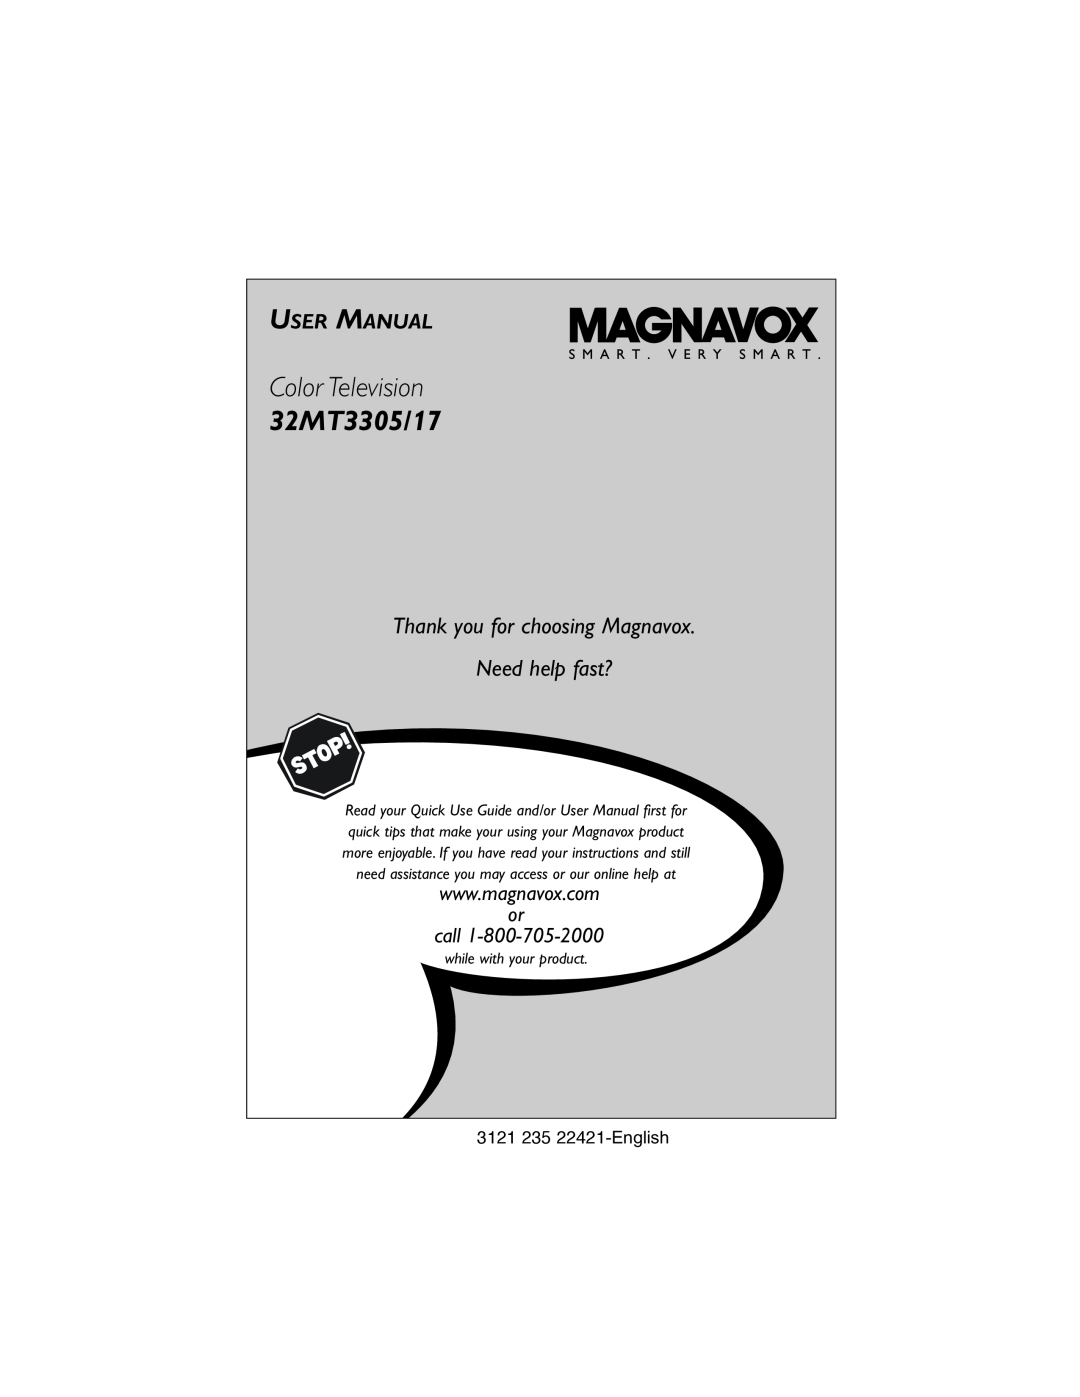 Magnavox 32MT3305/17 user manual 3121 235 22421-English, Color Television, Thank you for choosing Magnavox Need help fast? 